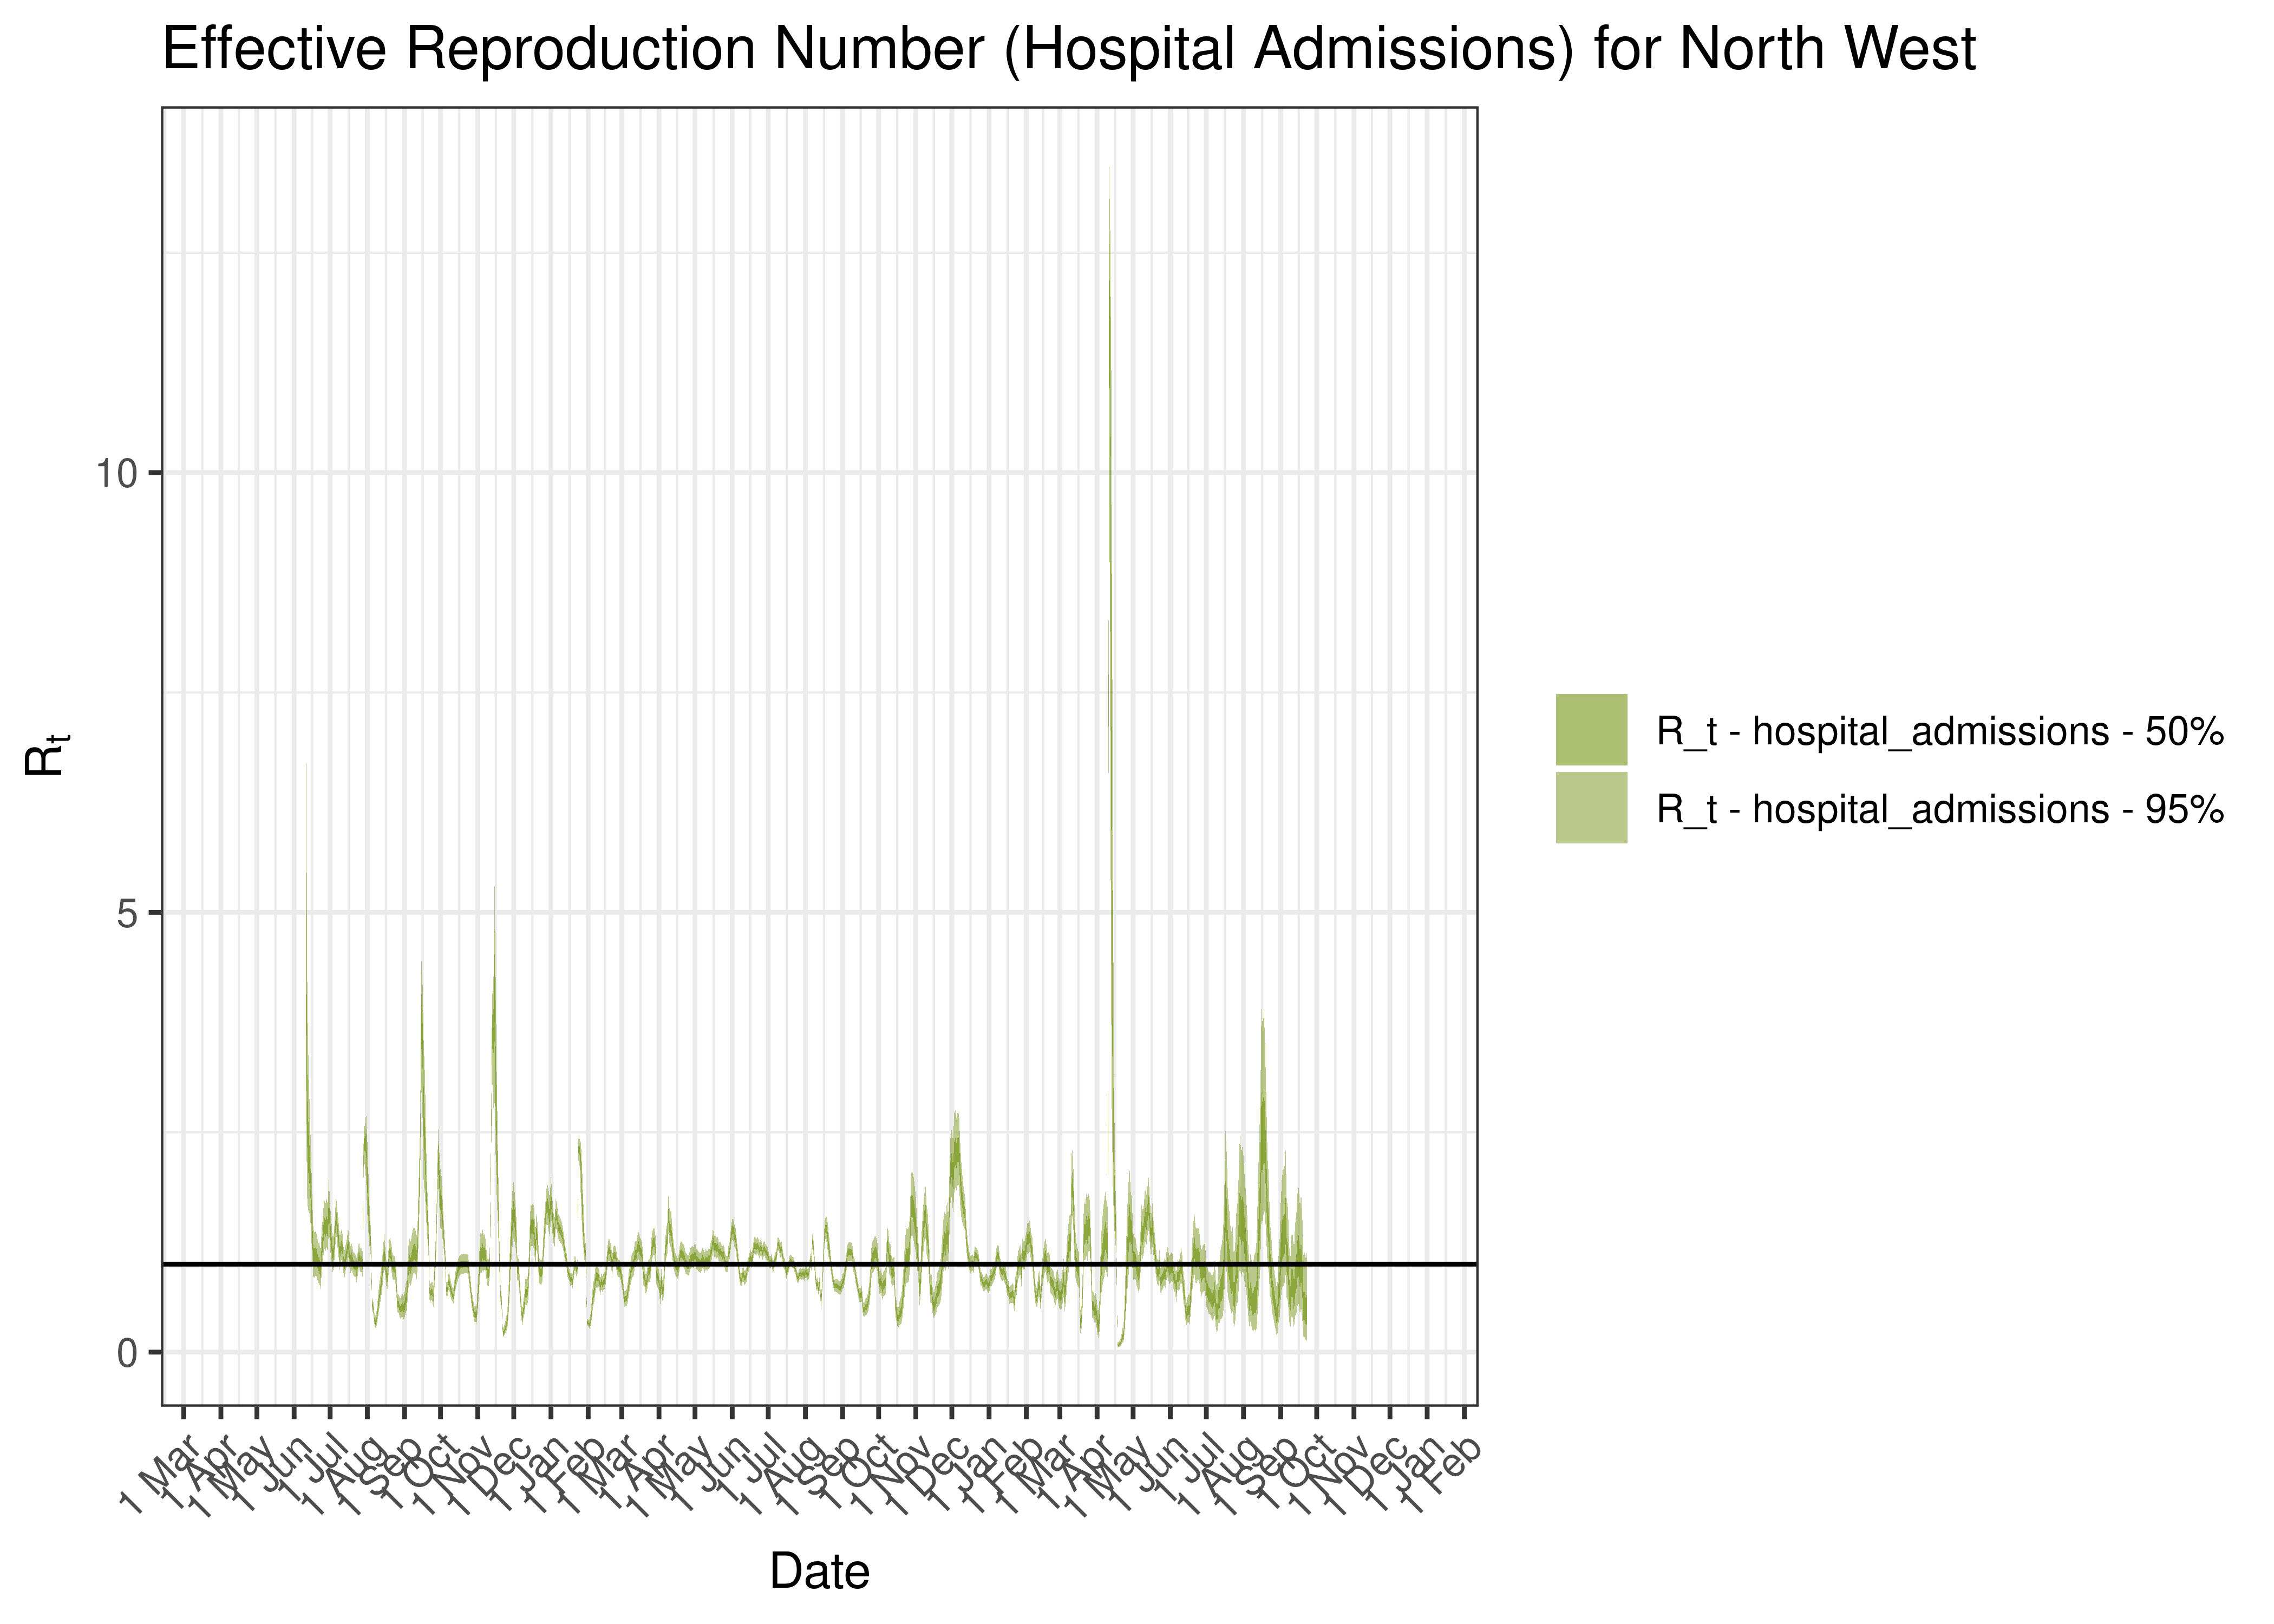 Estimated Effective Reproduction Number Based on Hospital Admissions for North West since 1 April 2020